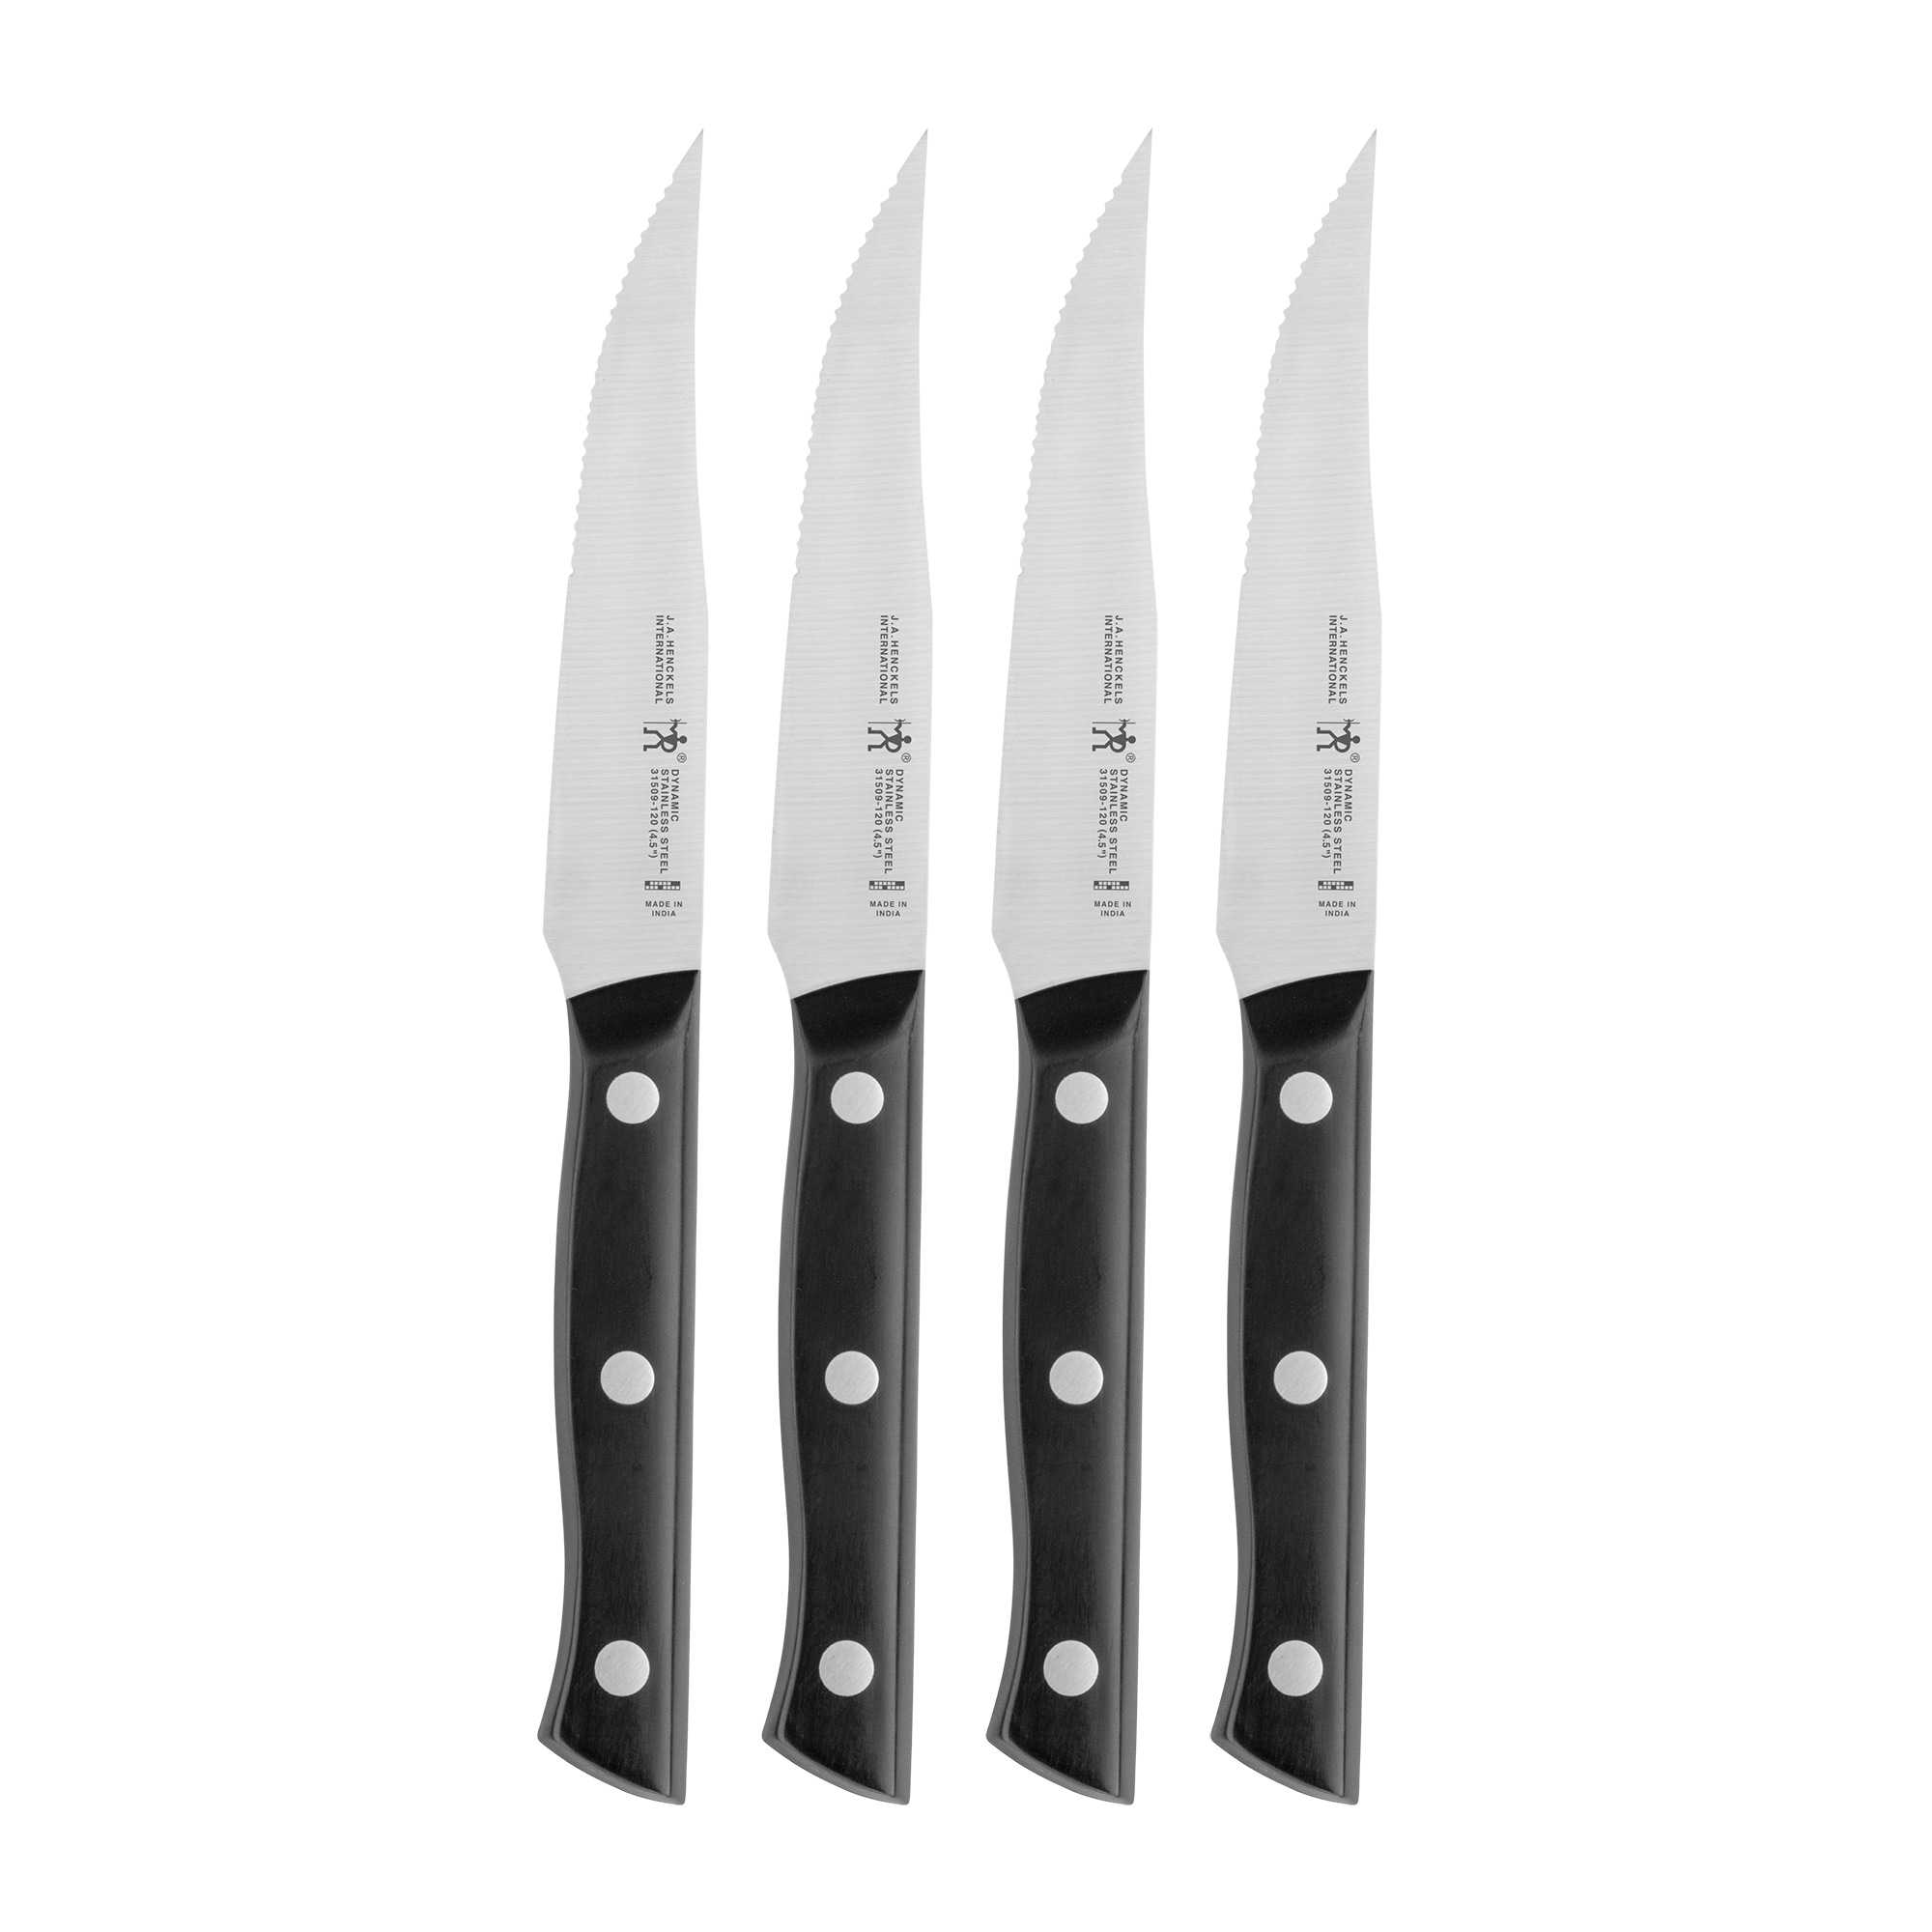 Clearance 6Pcs Steak Knife Set Serrated Stainless Steel Utility with Wooden  Handle for Home Dining Restaurant 